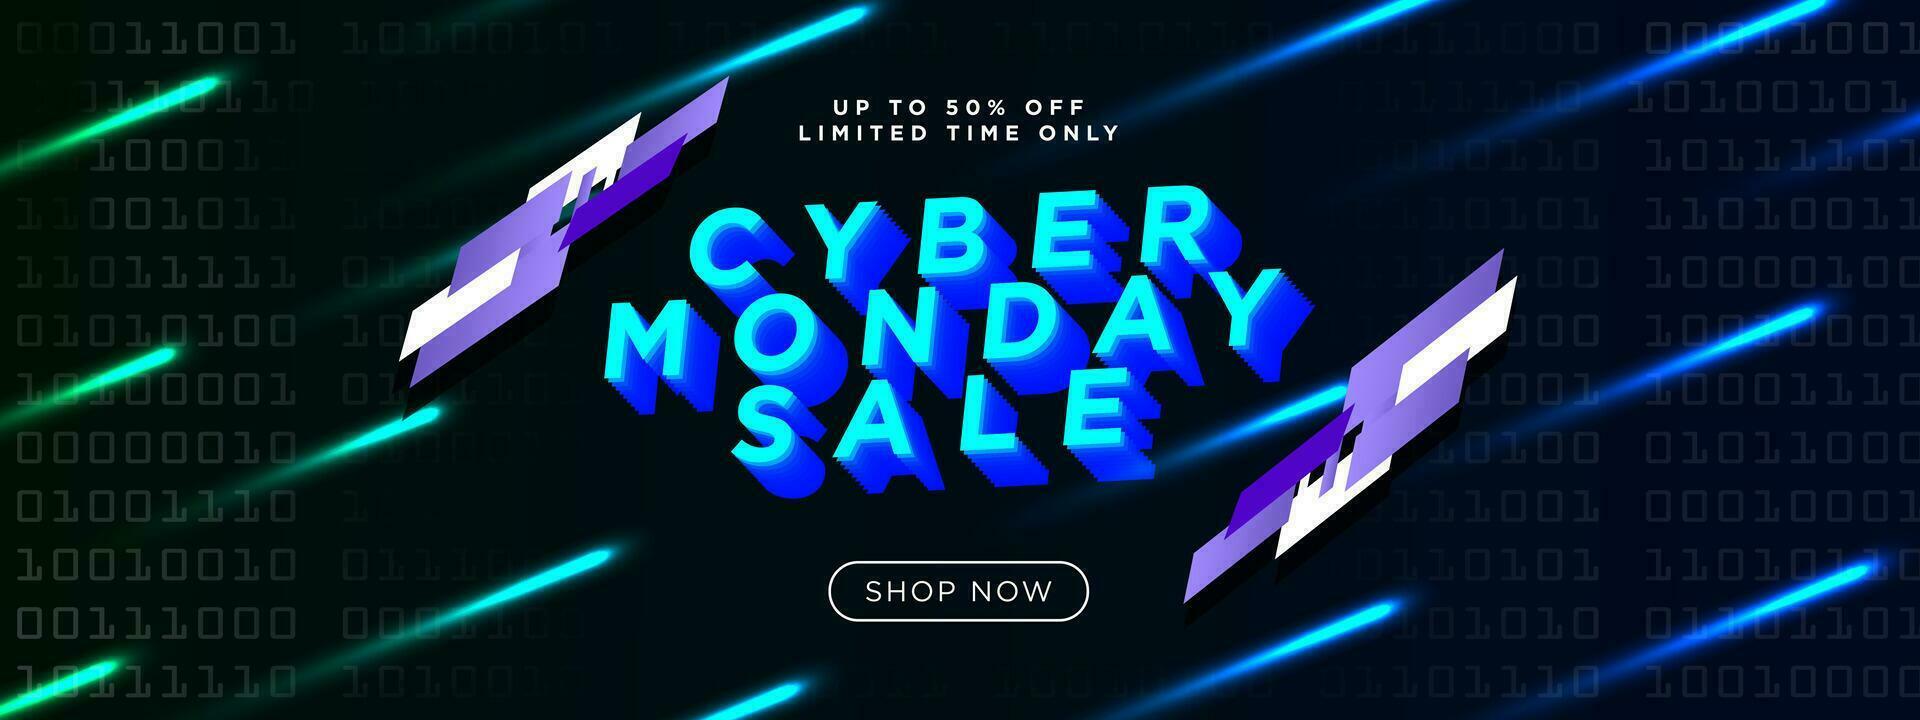 Creative Cyber Monday Sale Signage with Typographic design, up to 50 off text and shop now button. Dark background with beams of light. Vector illustration. EPS 10.